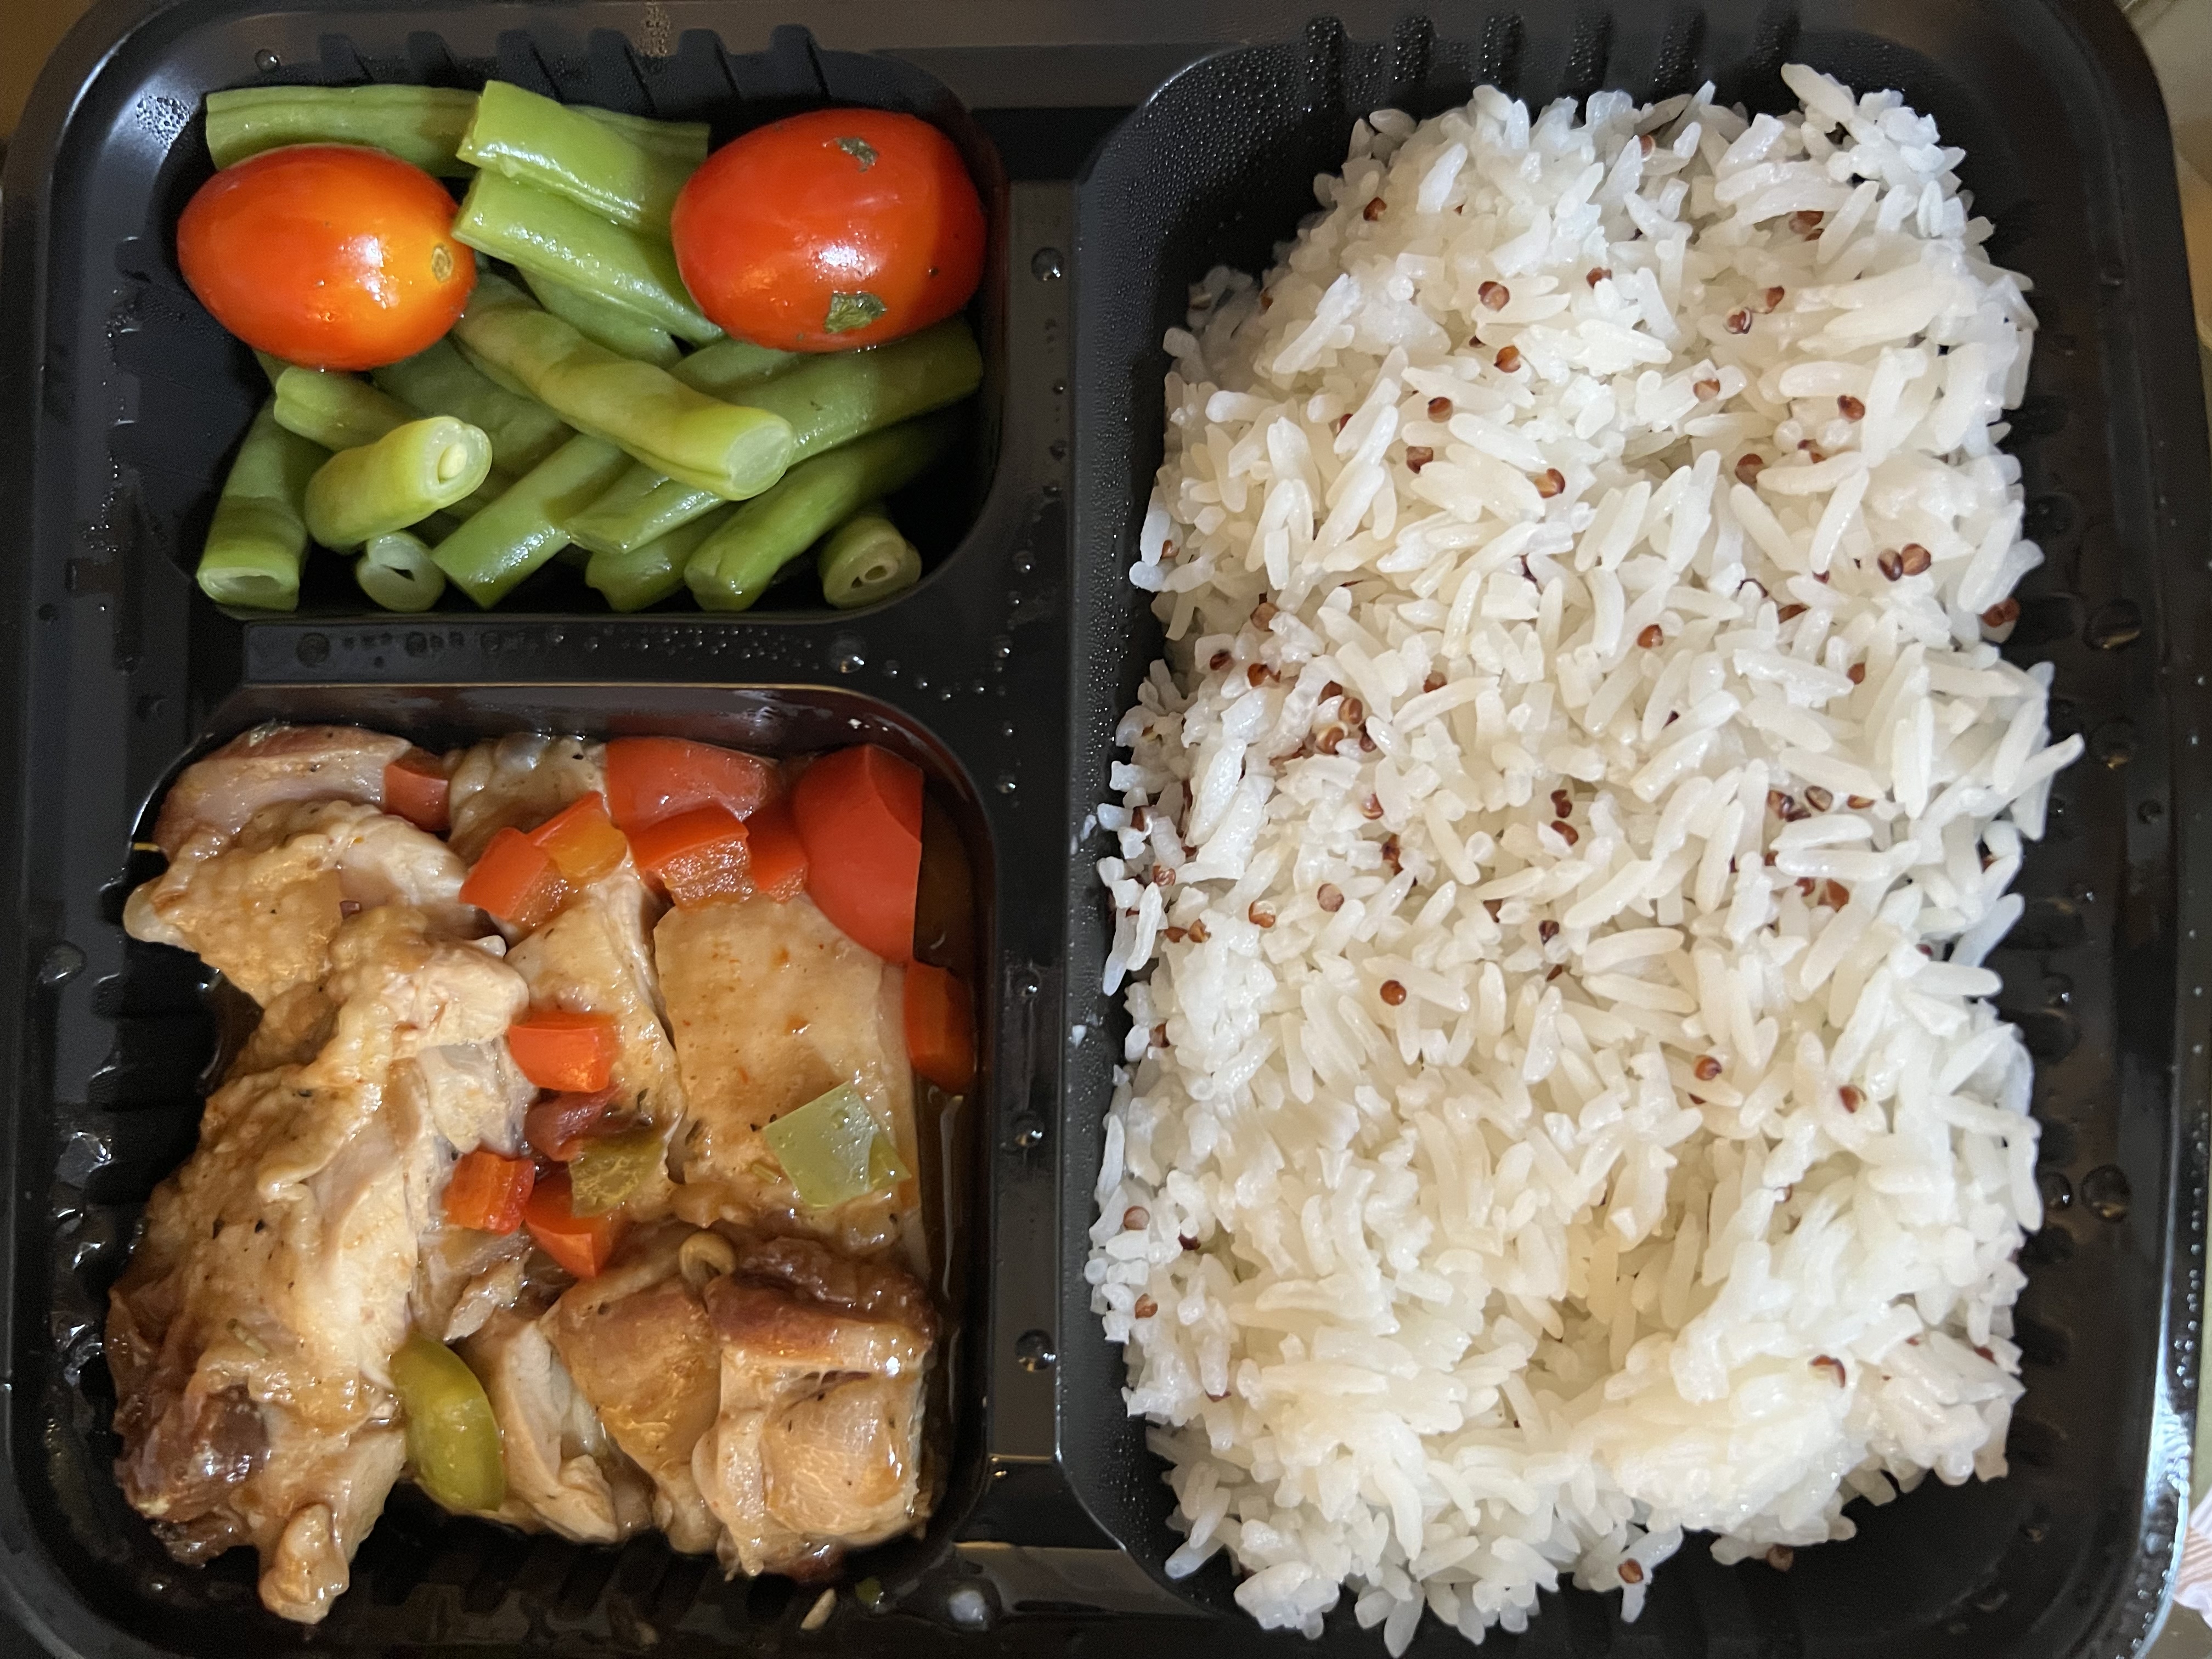 Chicken, vegetables, and rice